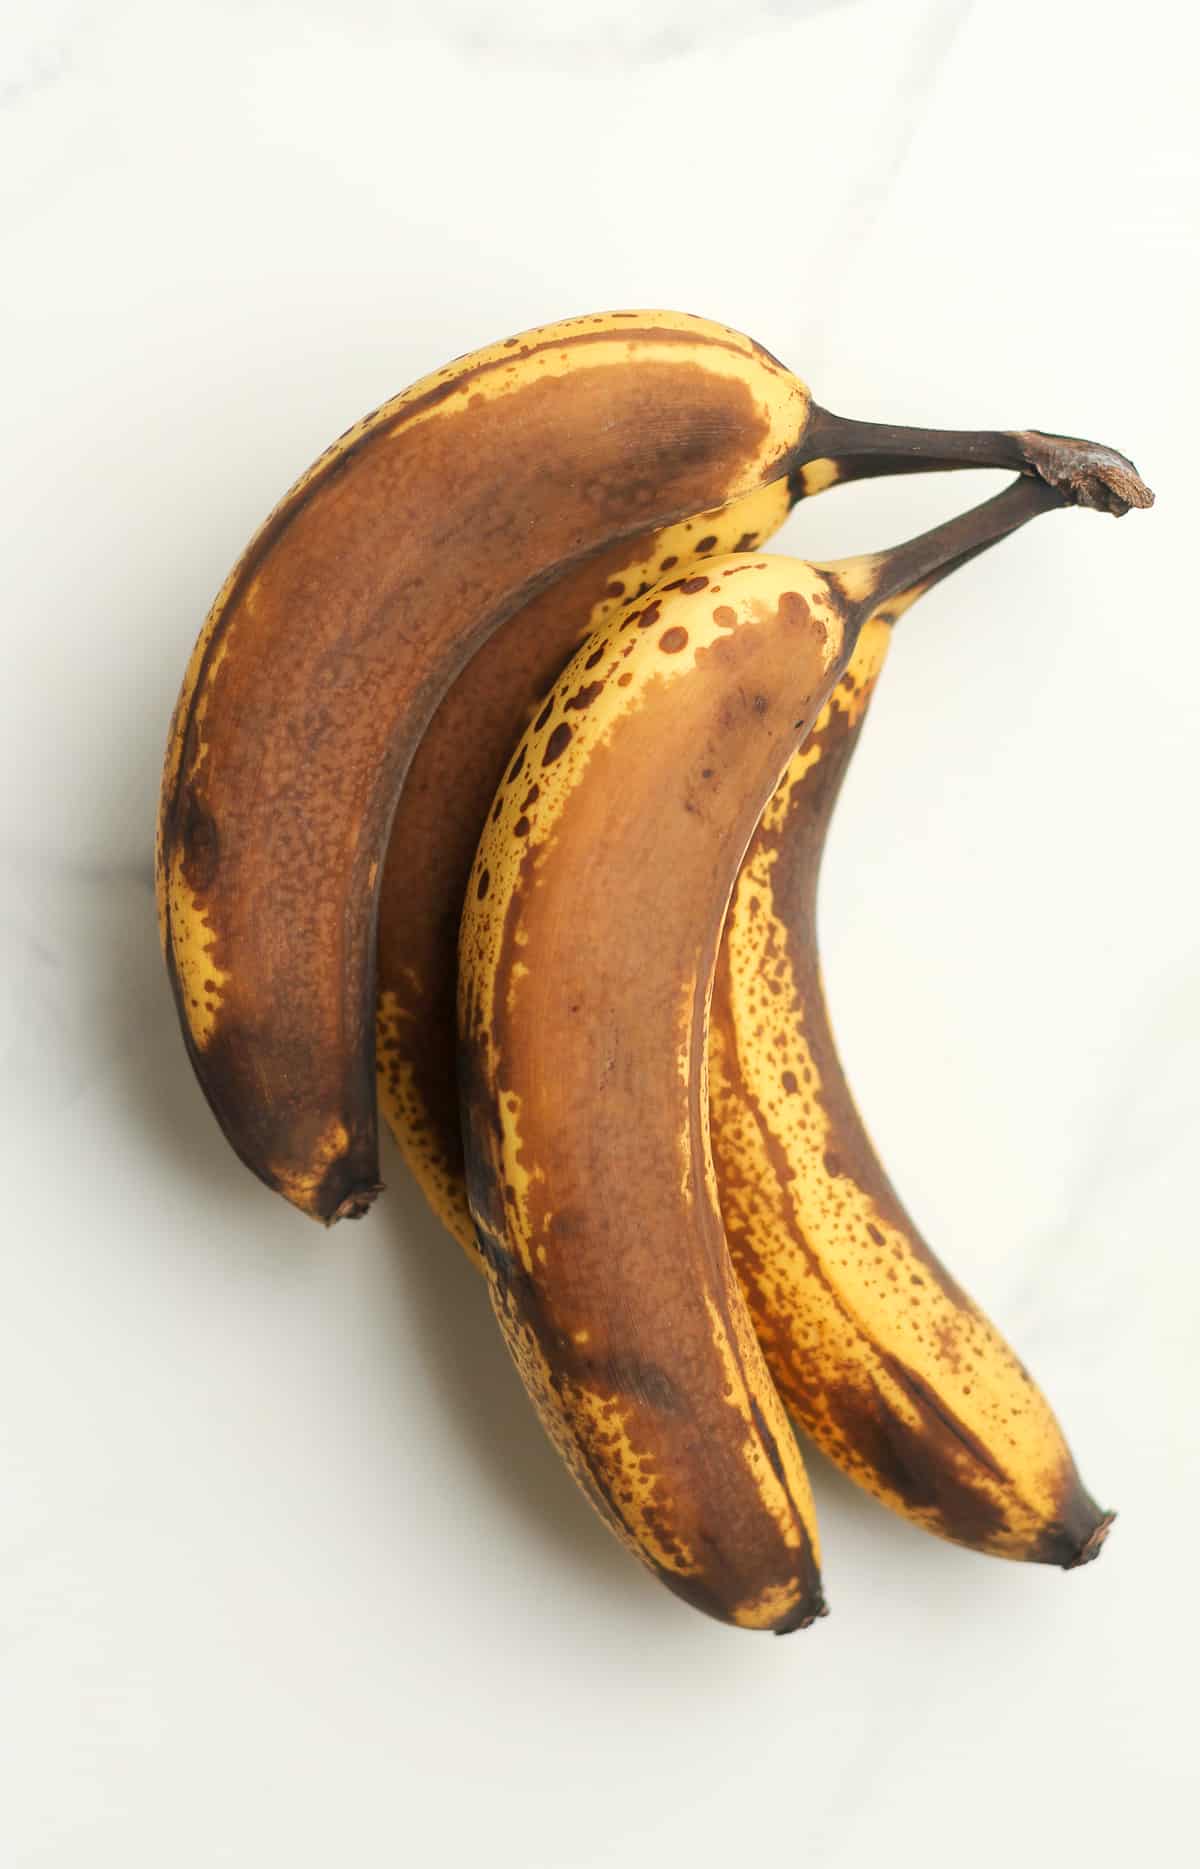 Some over-ripe bananas on a white background.